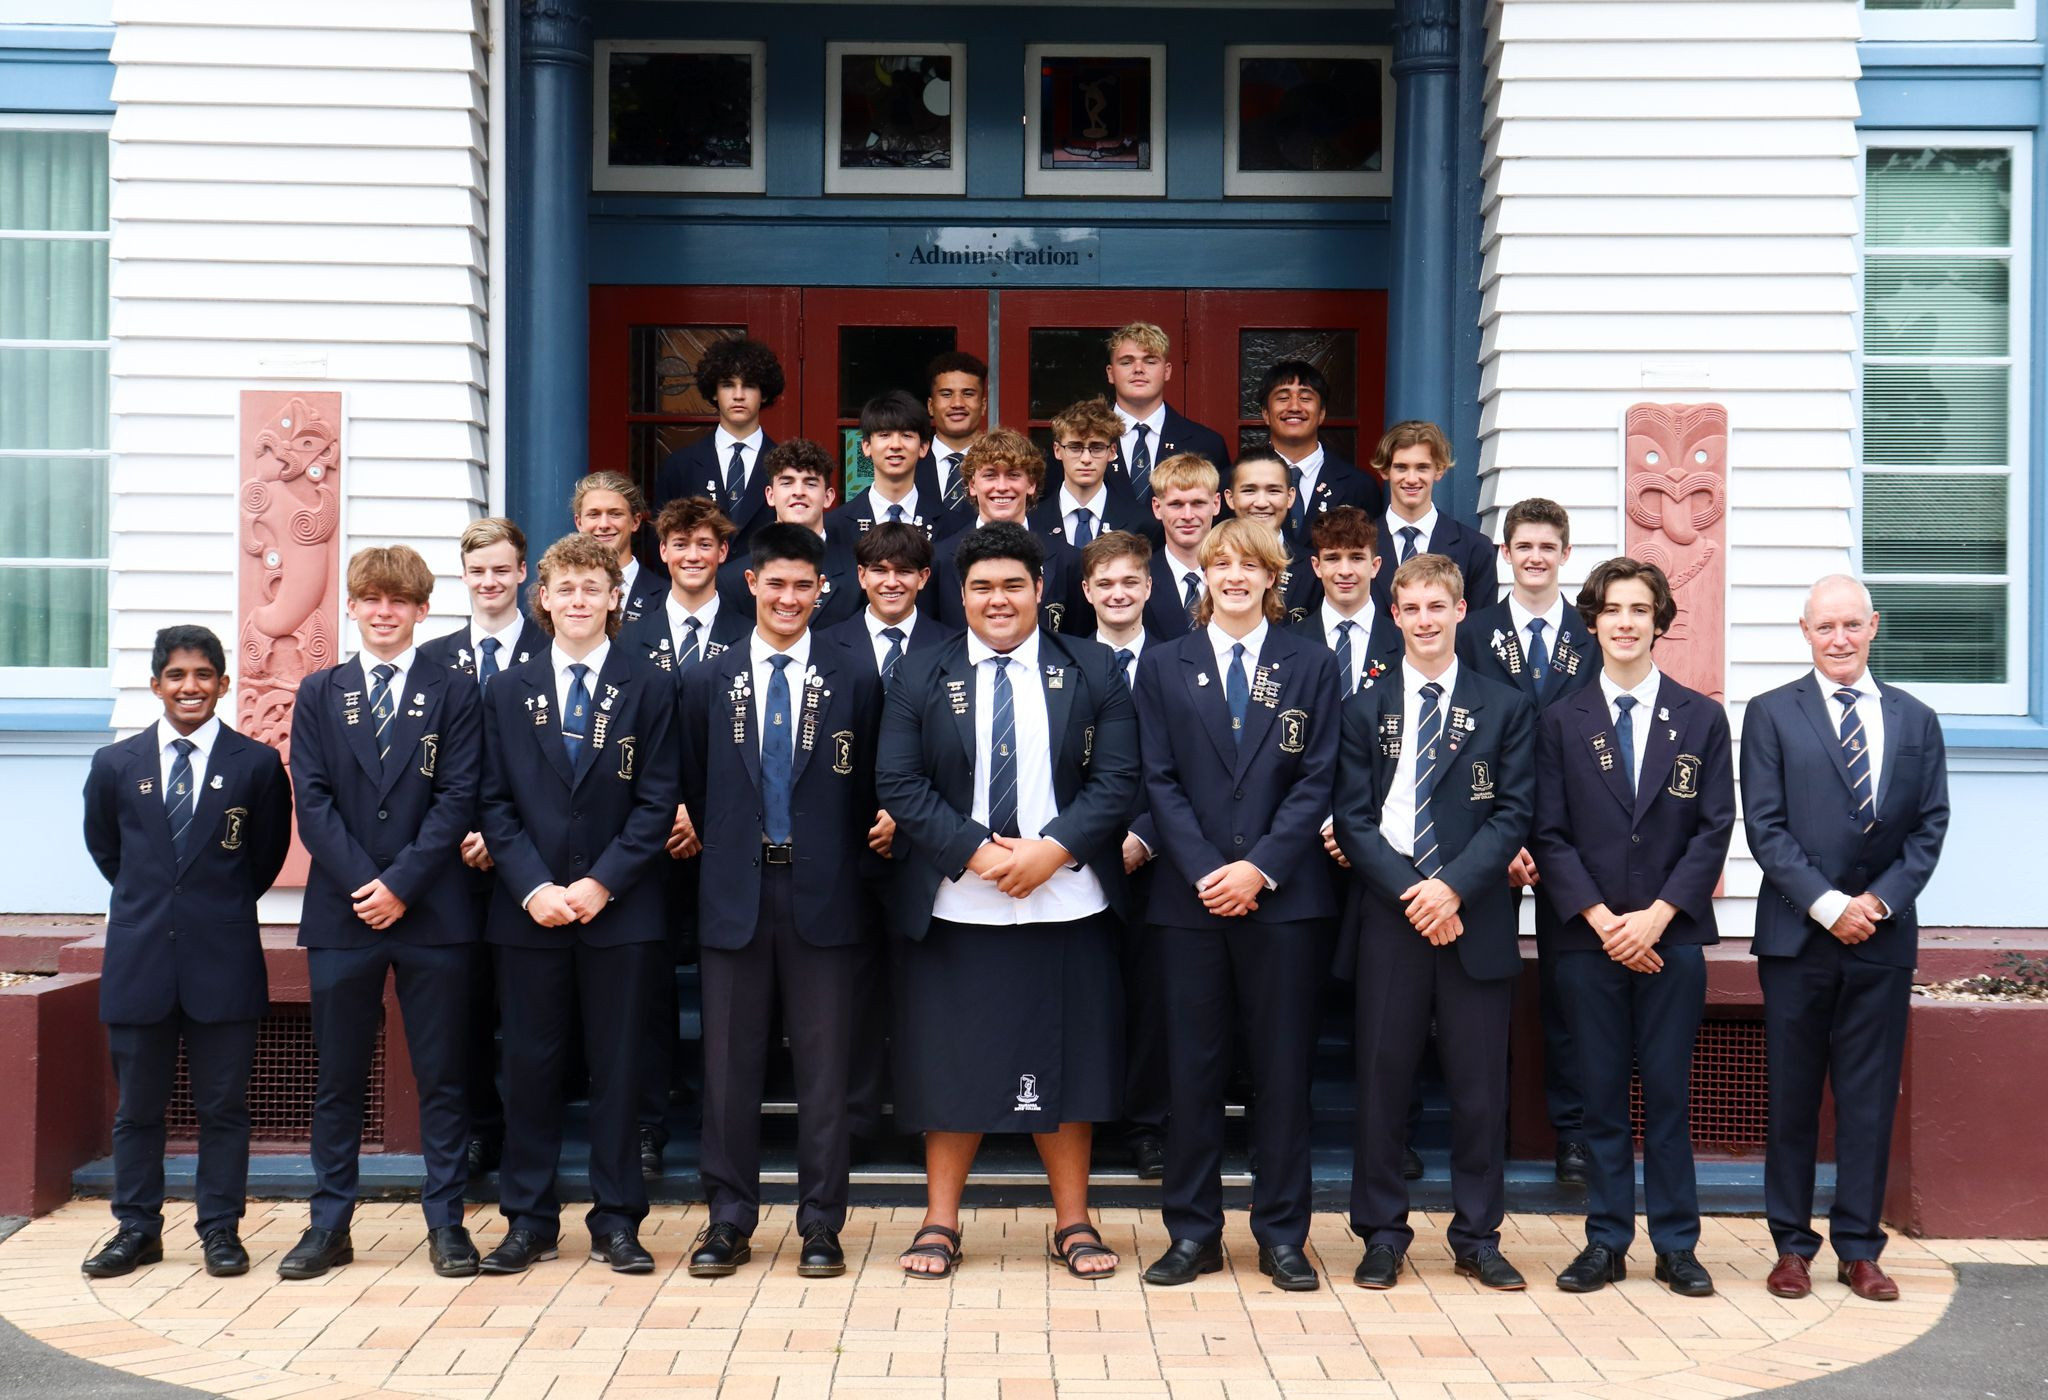 Students 2022 - Our People - About Us  -  Tauranga Boys' College - Our People - About  -  Tauranga Boys' College